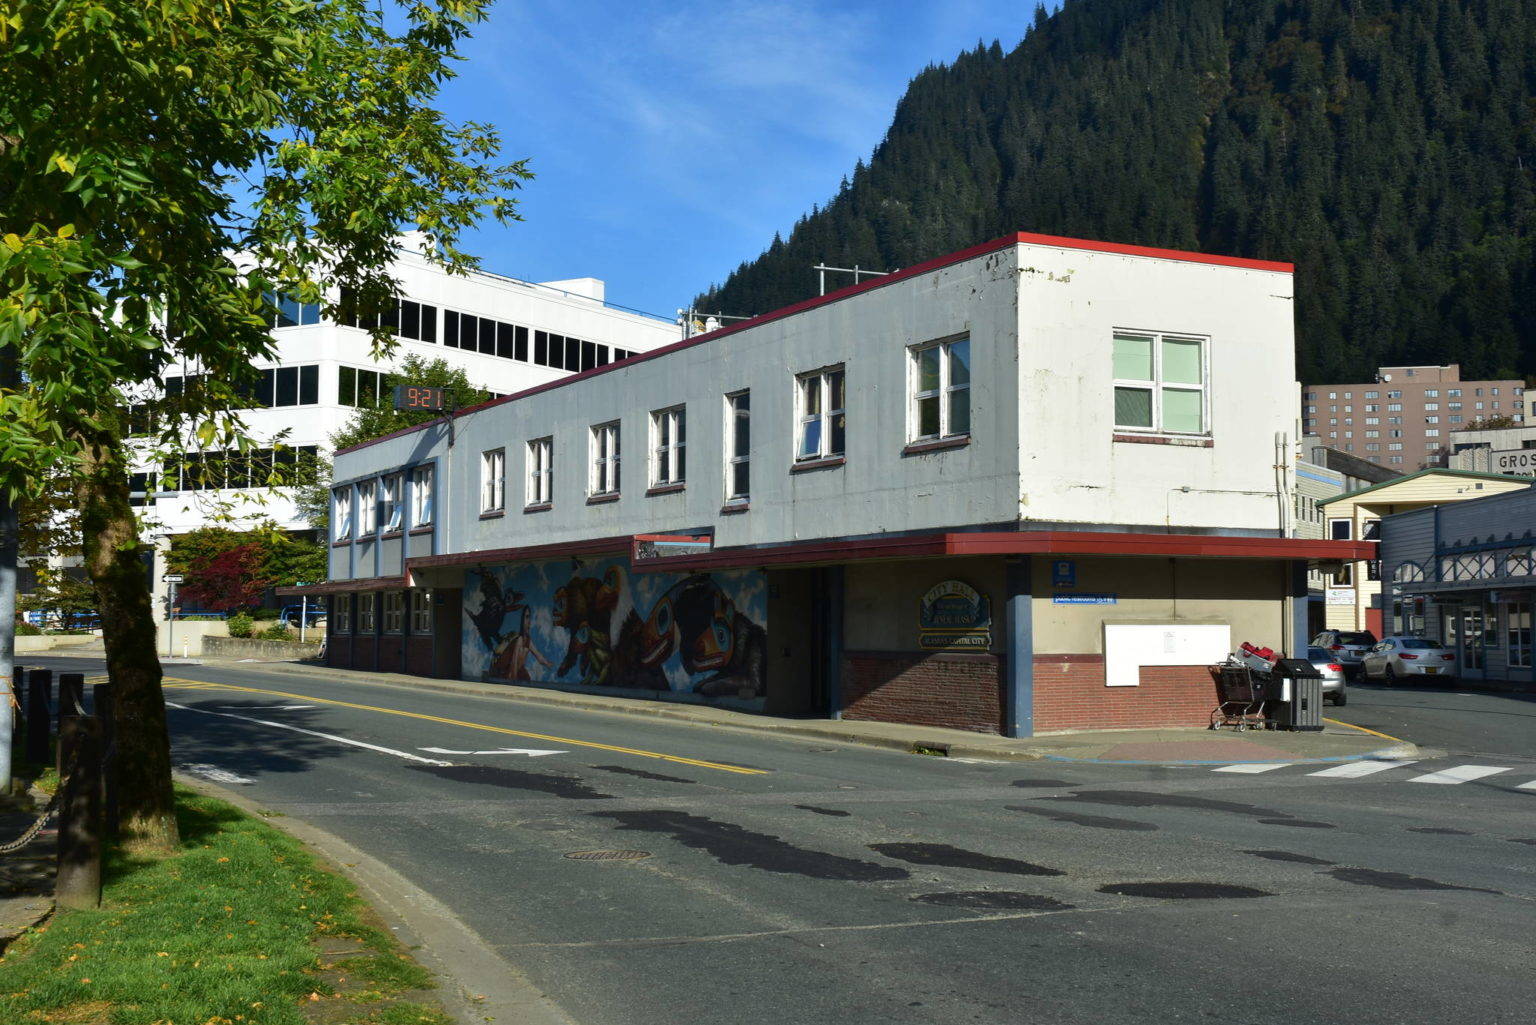 Juneau City Hall on Tuesday, Sept. 15, 2020. The City and Borough of Juneau Assembly added an additional $2 million in CARES Act money to the city’s small business grant program, allowing the next phase of the program to begin sooner. (Peter Segall / Juneau Empire)